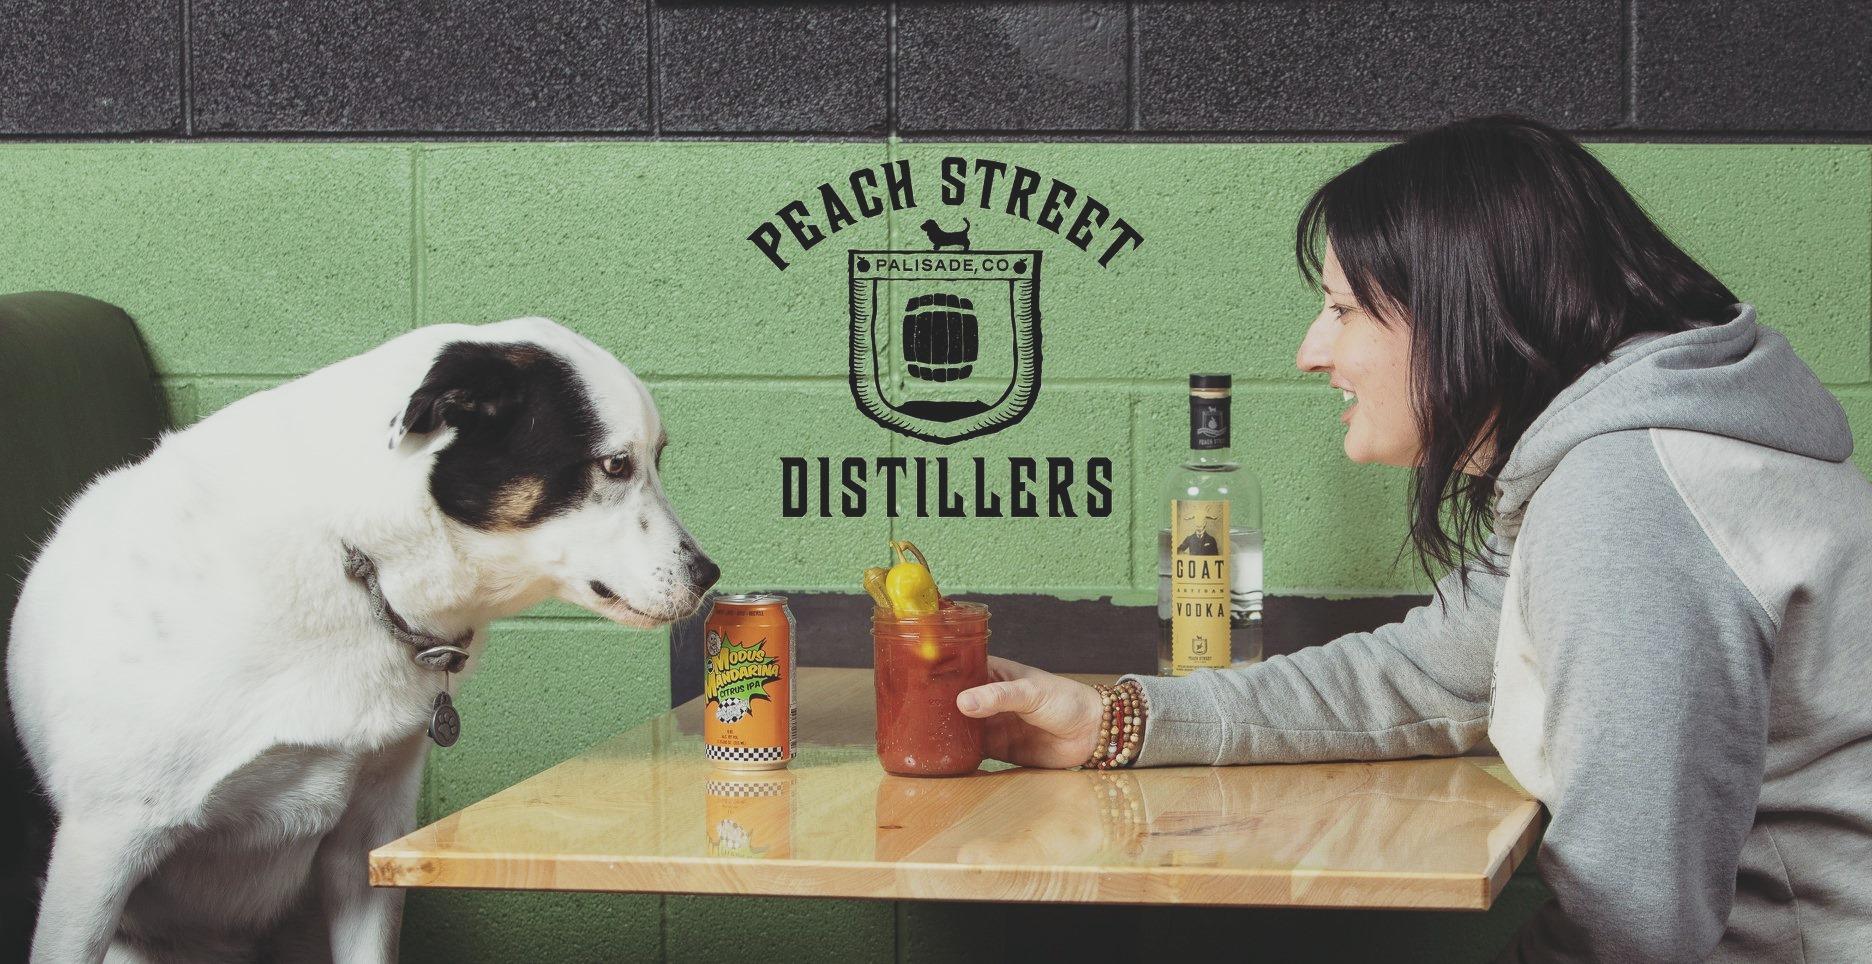 Pet Friendly Peach Street Distillers and the Foodery Depot